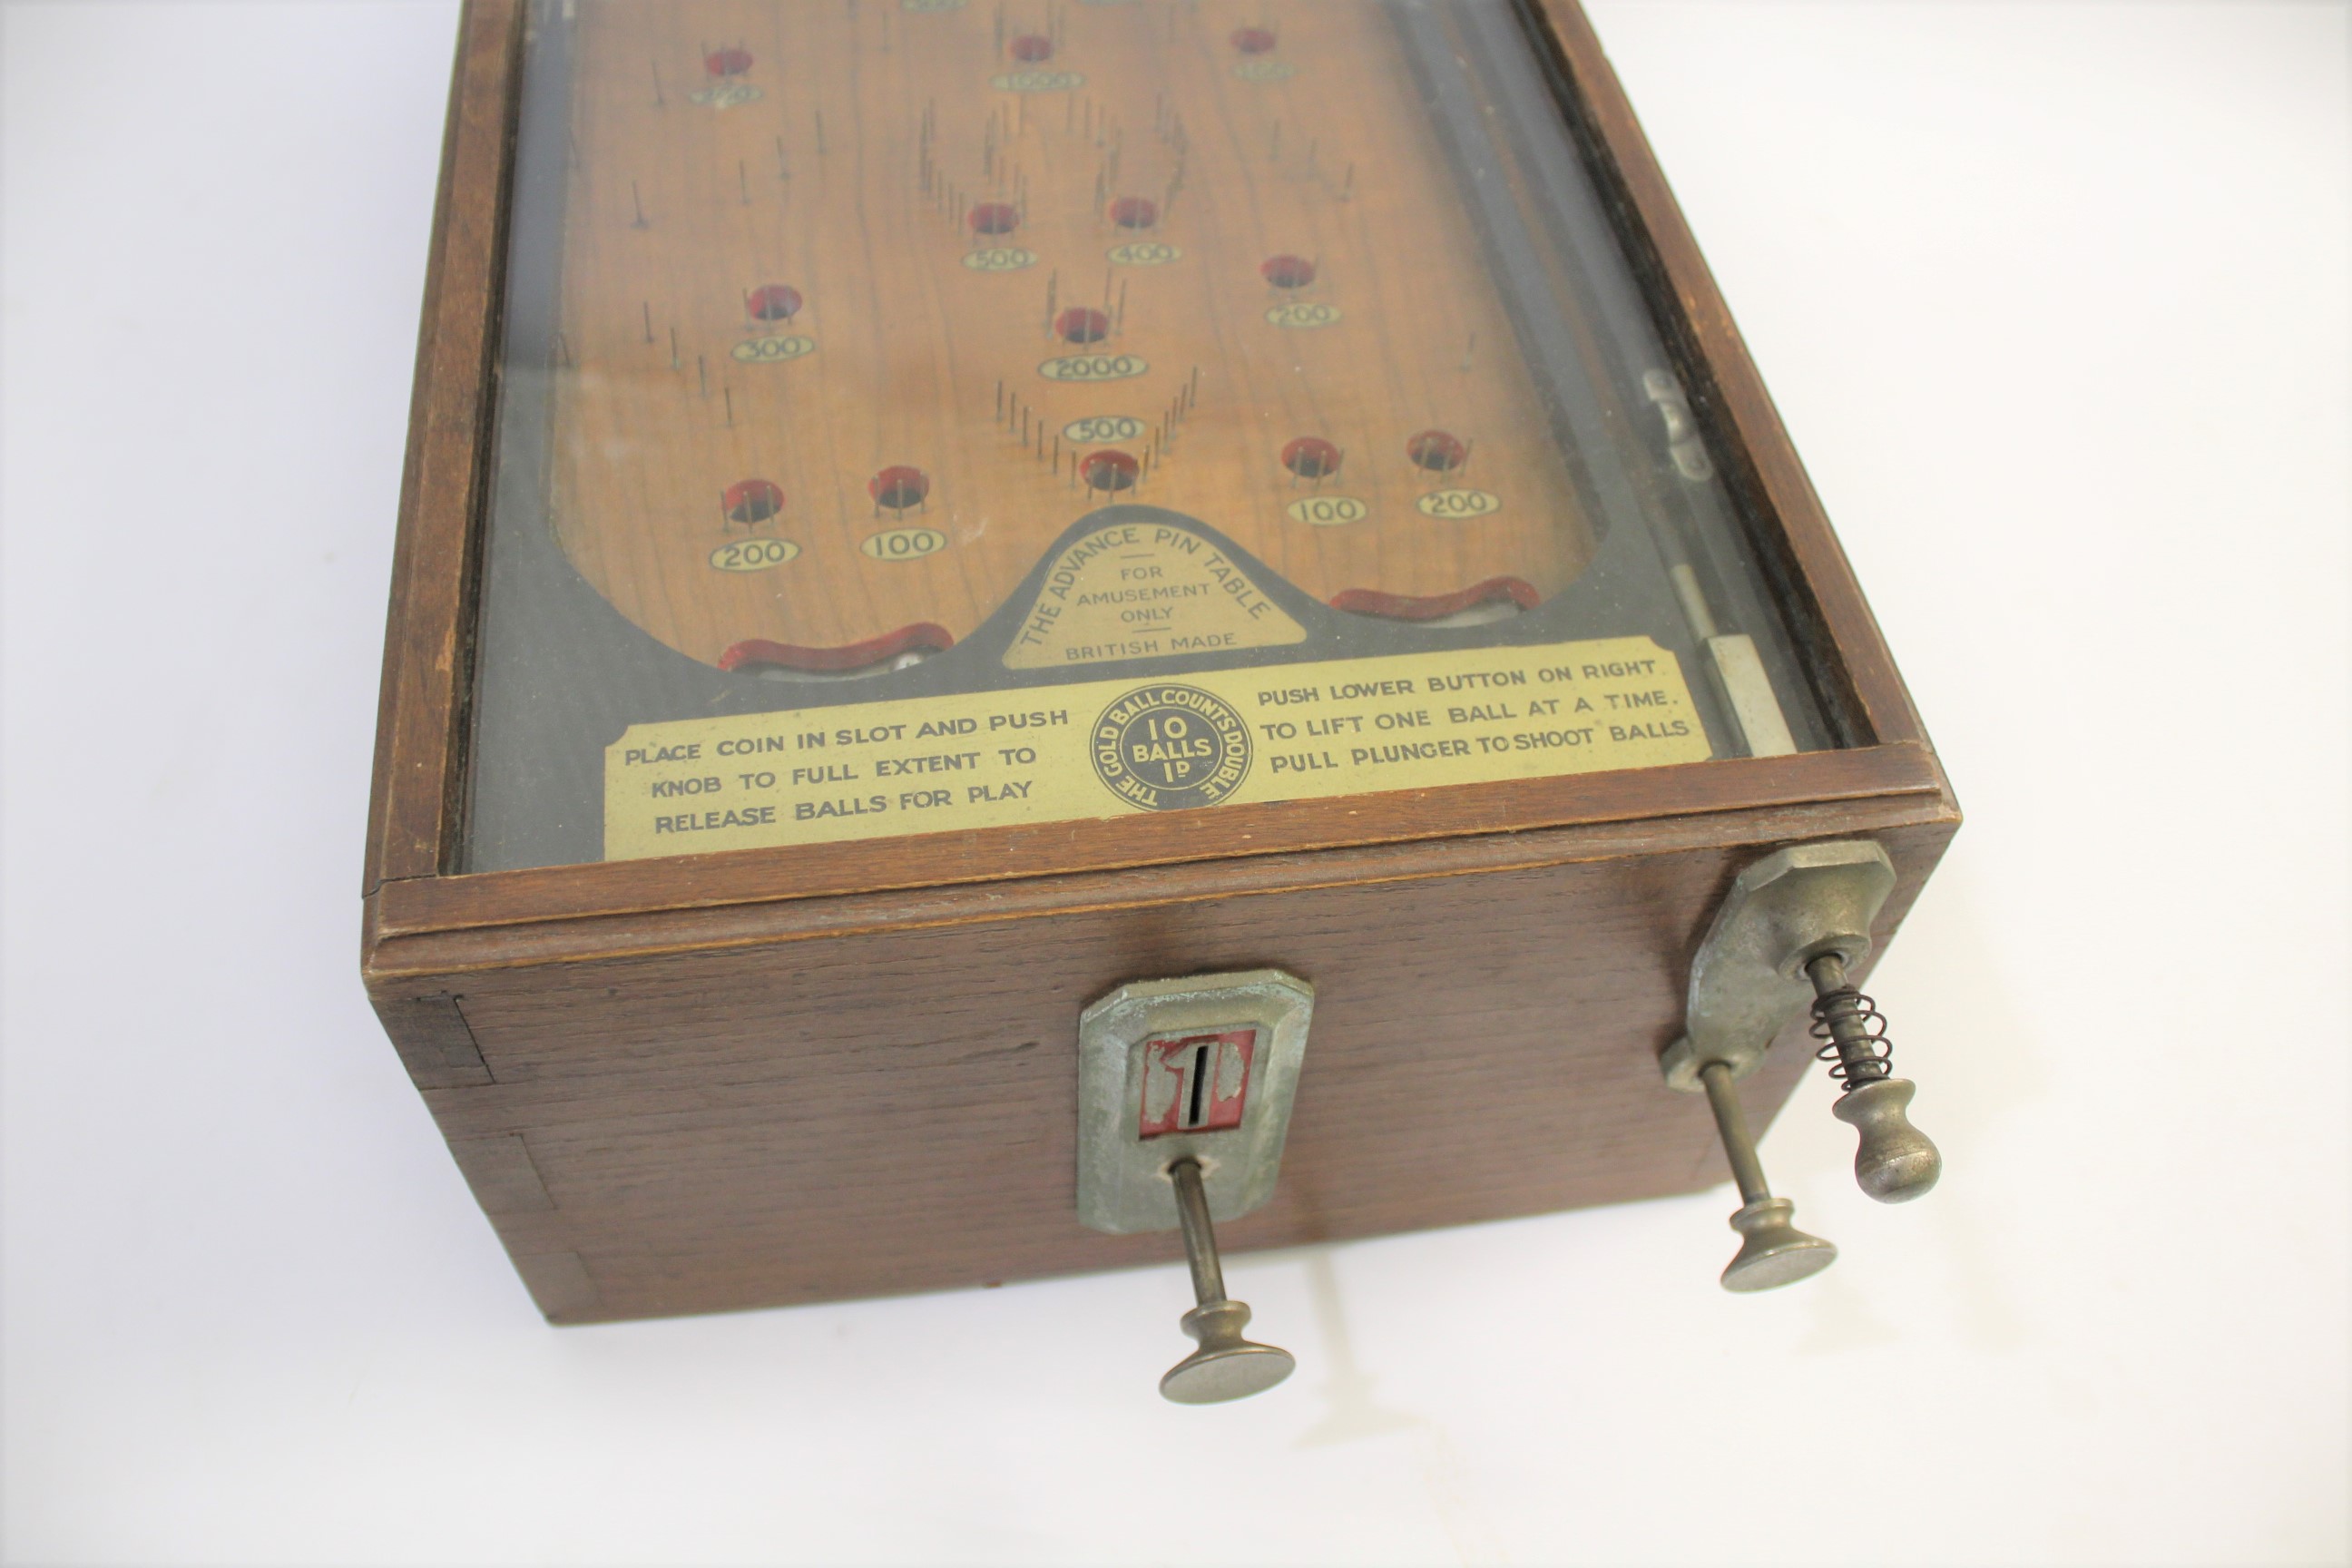 VINTAGE PINBALL GAME - 'THE ADVANCE PIN TABLE' a vintage pinball or bagatelle game The Advance Pin - Image 4 of 4